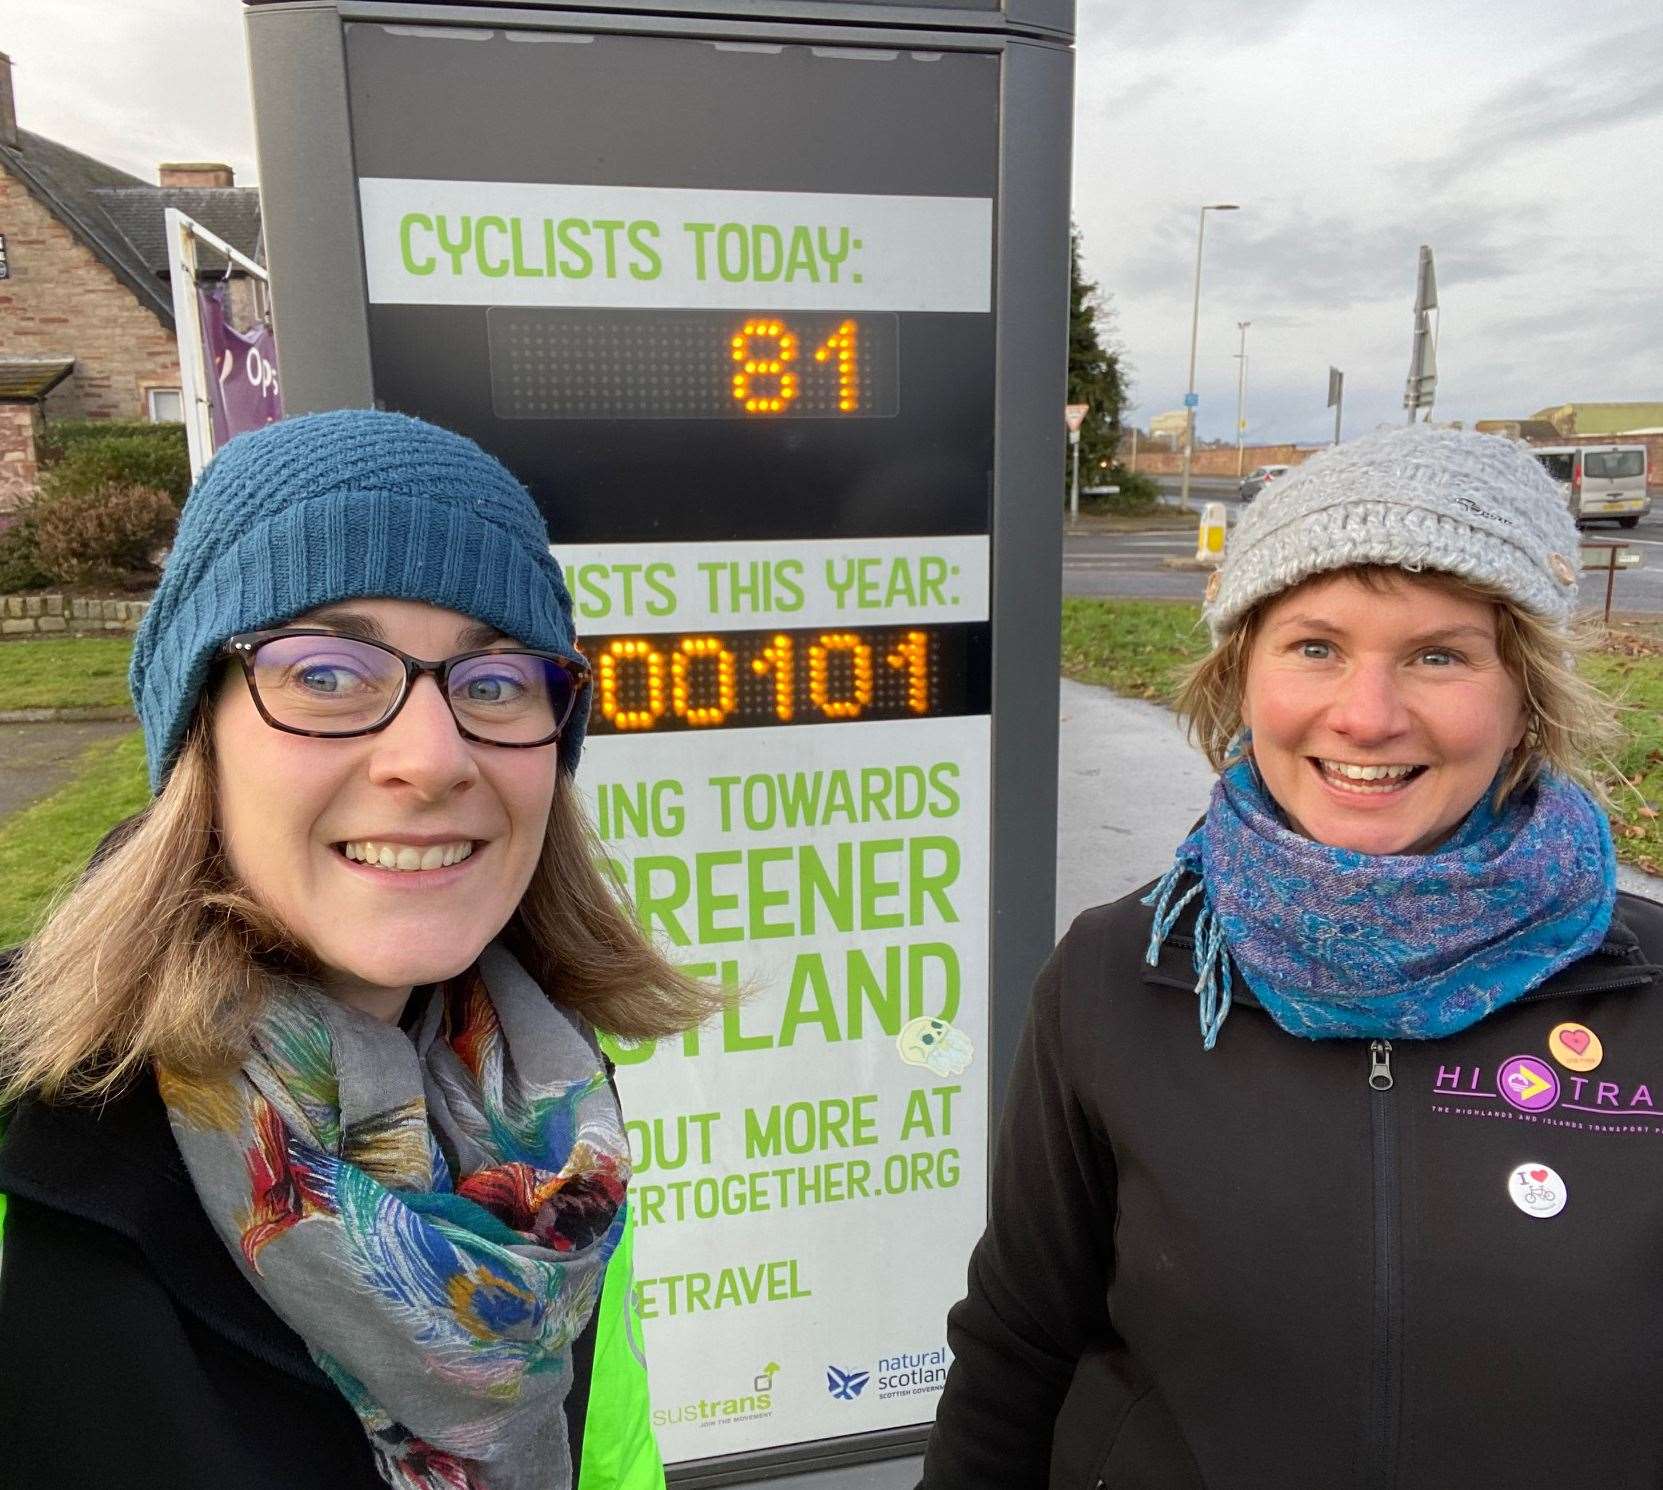 Fiona McInally (left) and Vikki Trelfer at the Millburn Road Cycle Counter after the milestone of 100,000 trips was recorded.